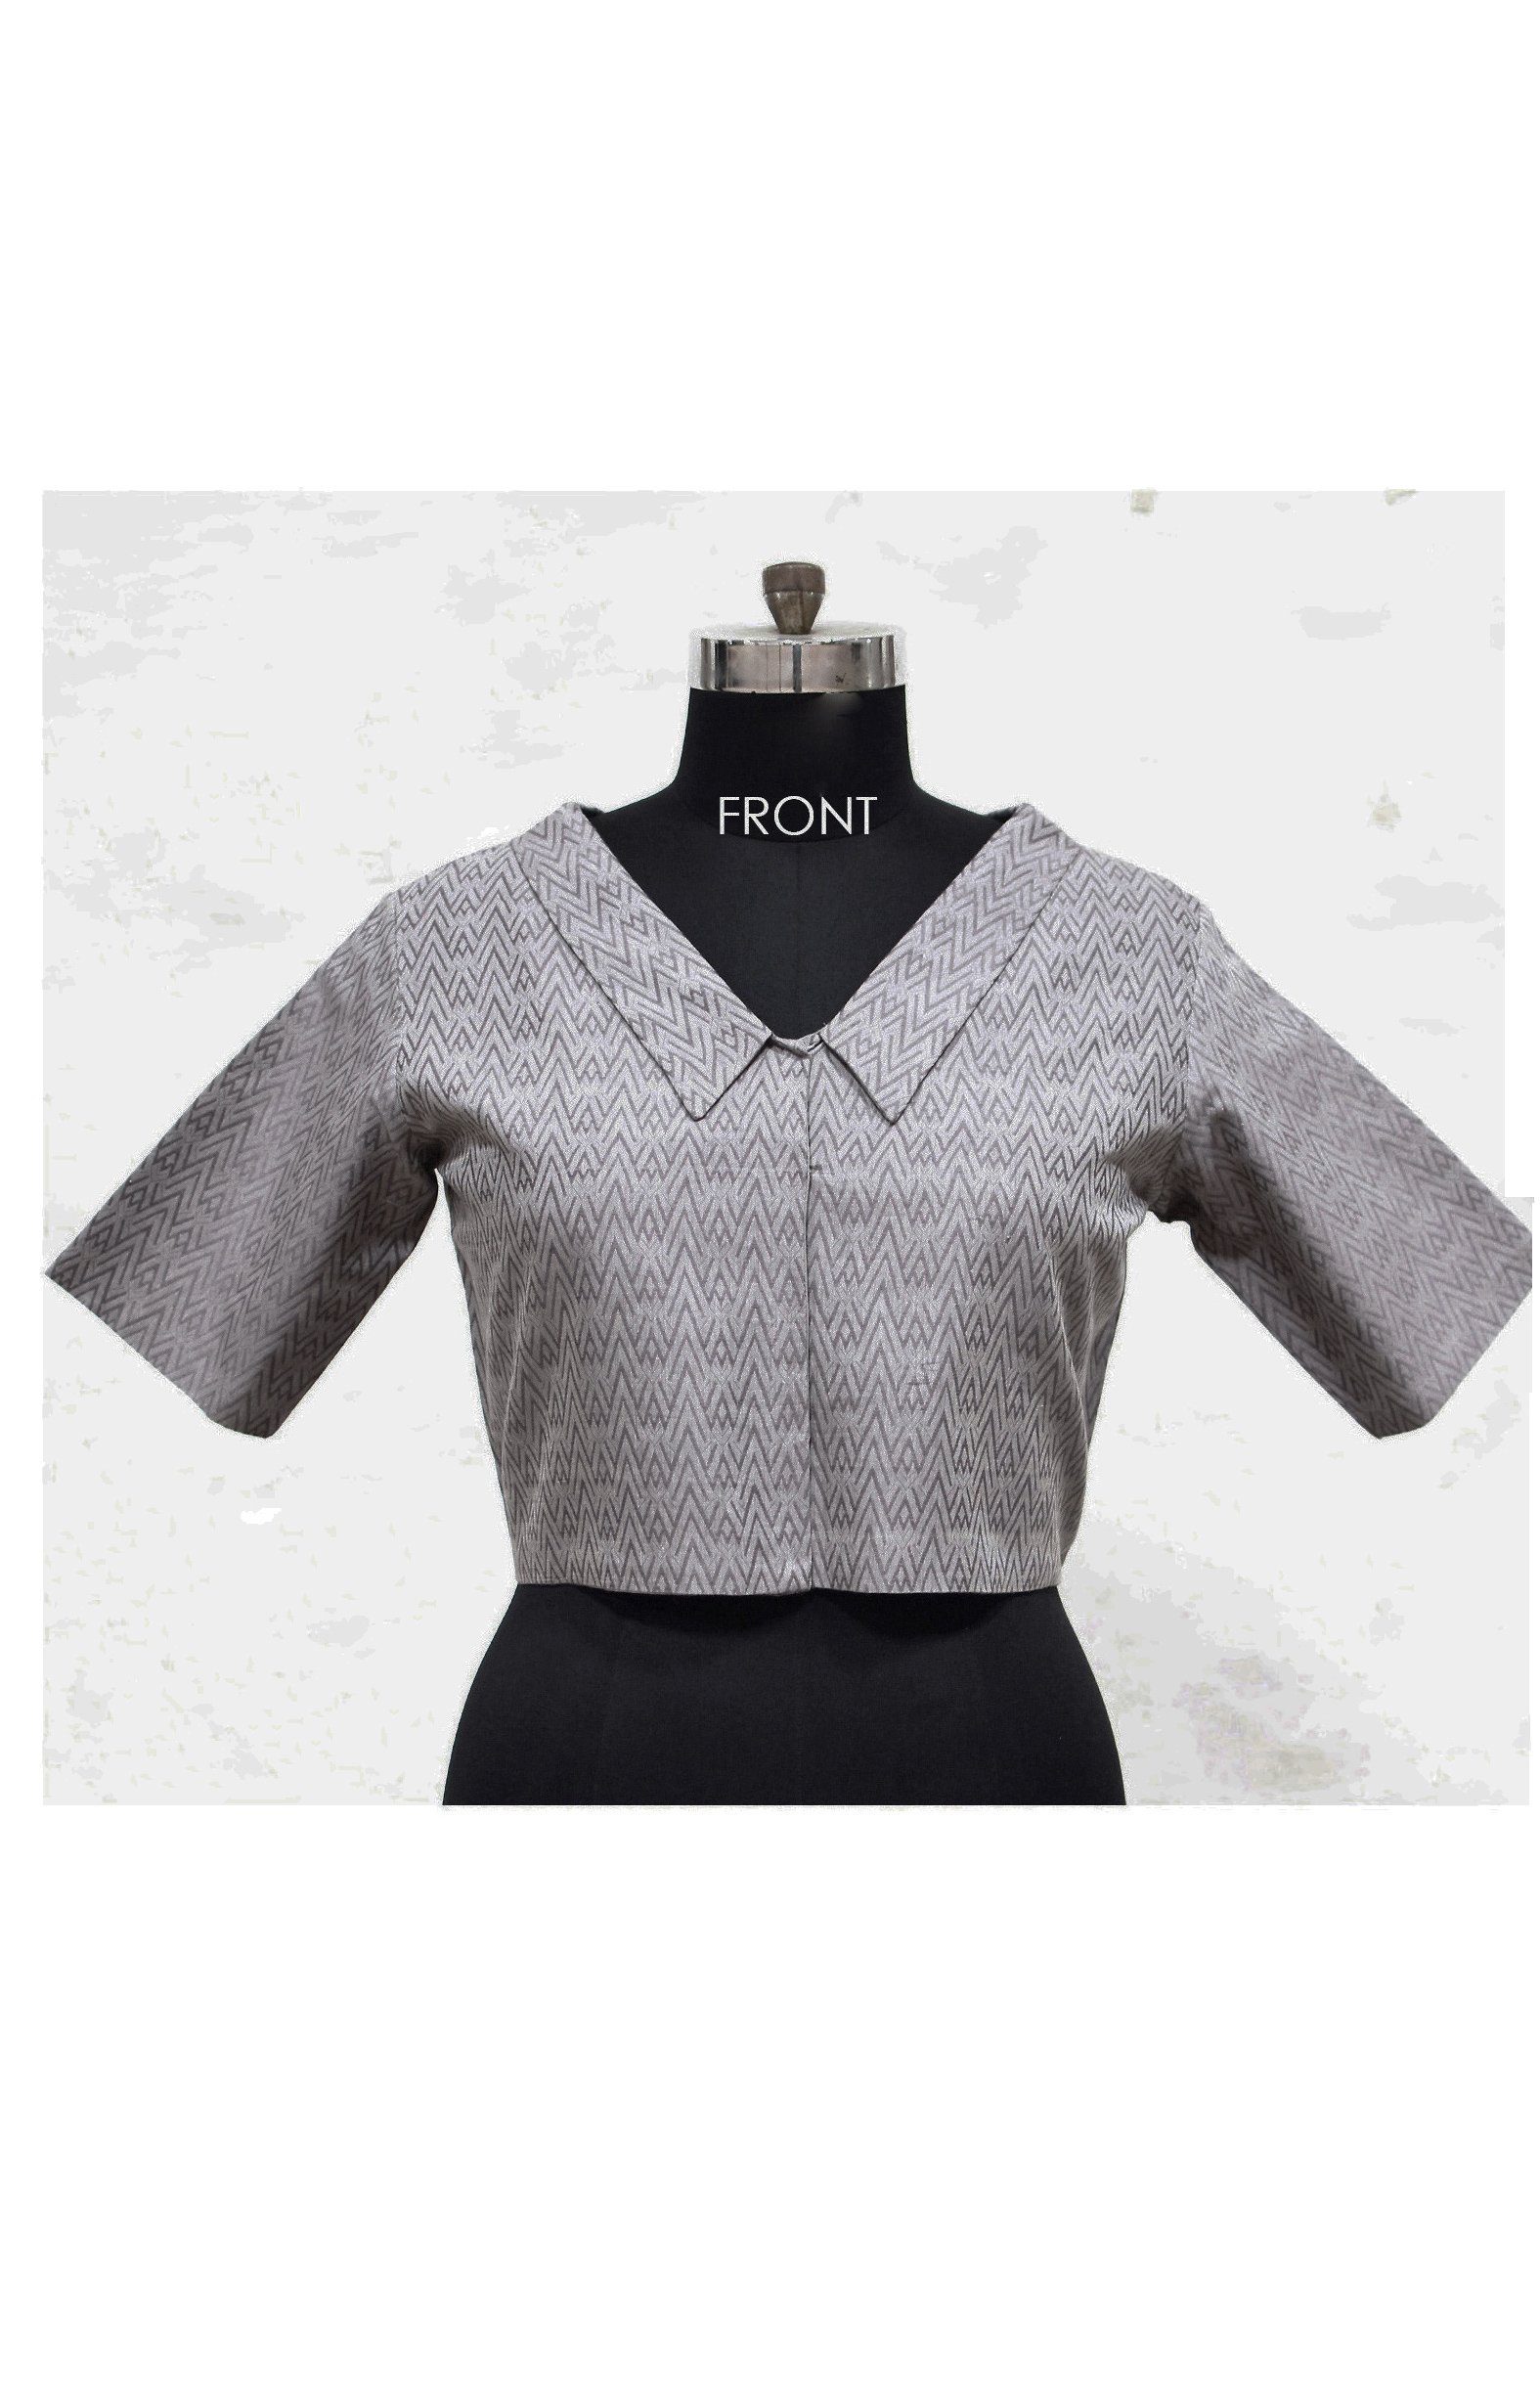 Grey, Handloom Organic Cotton Blouse with Collar (Size XL / Size 14)